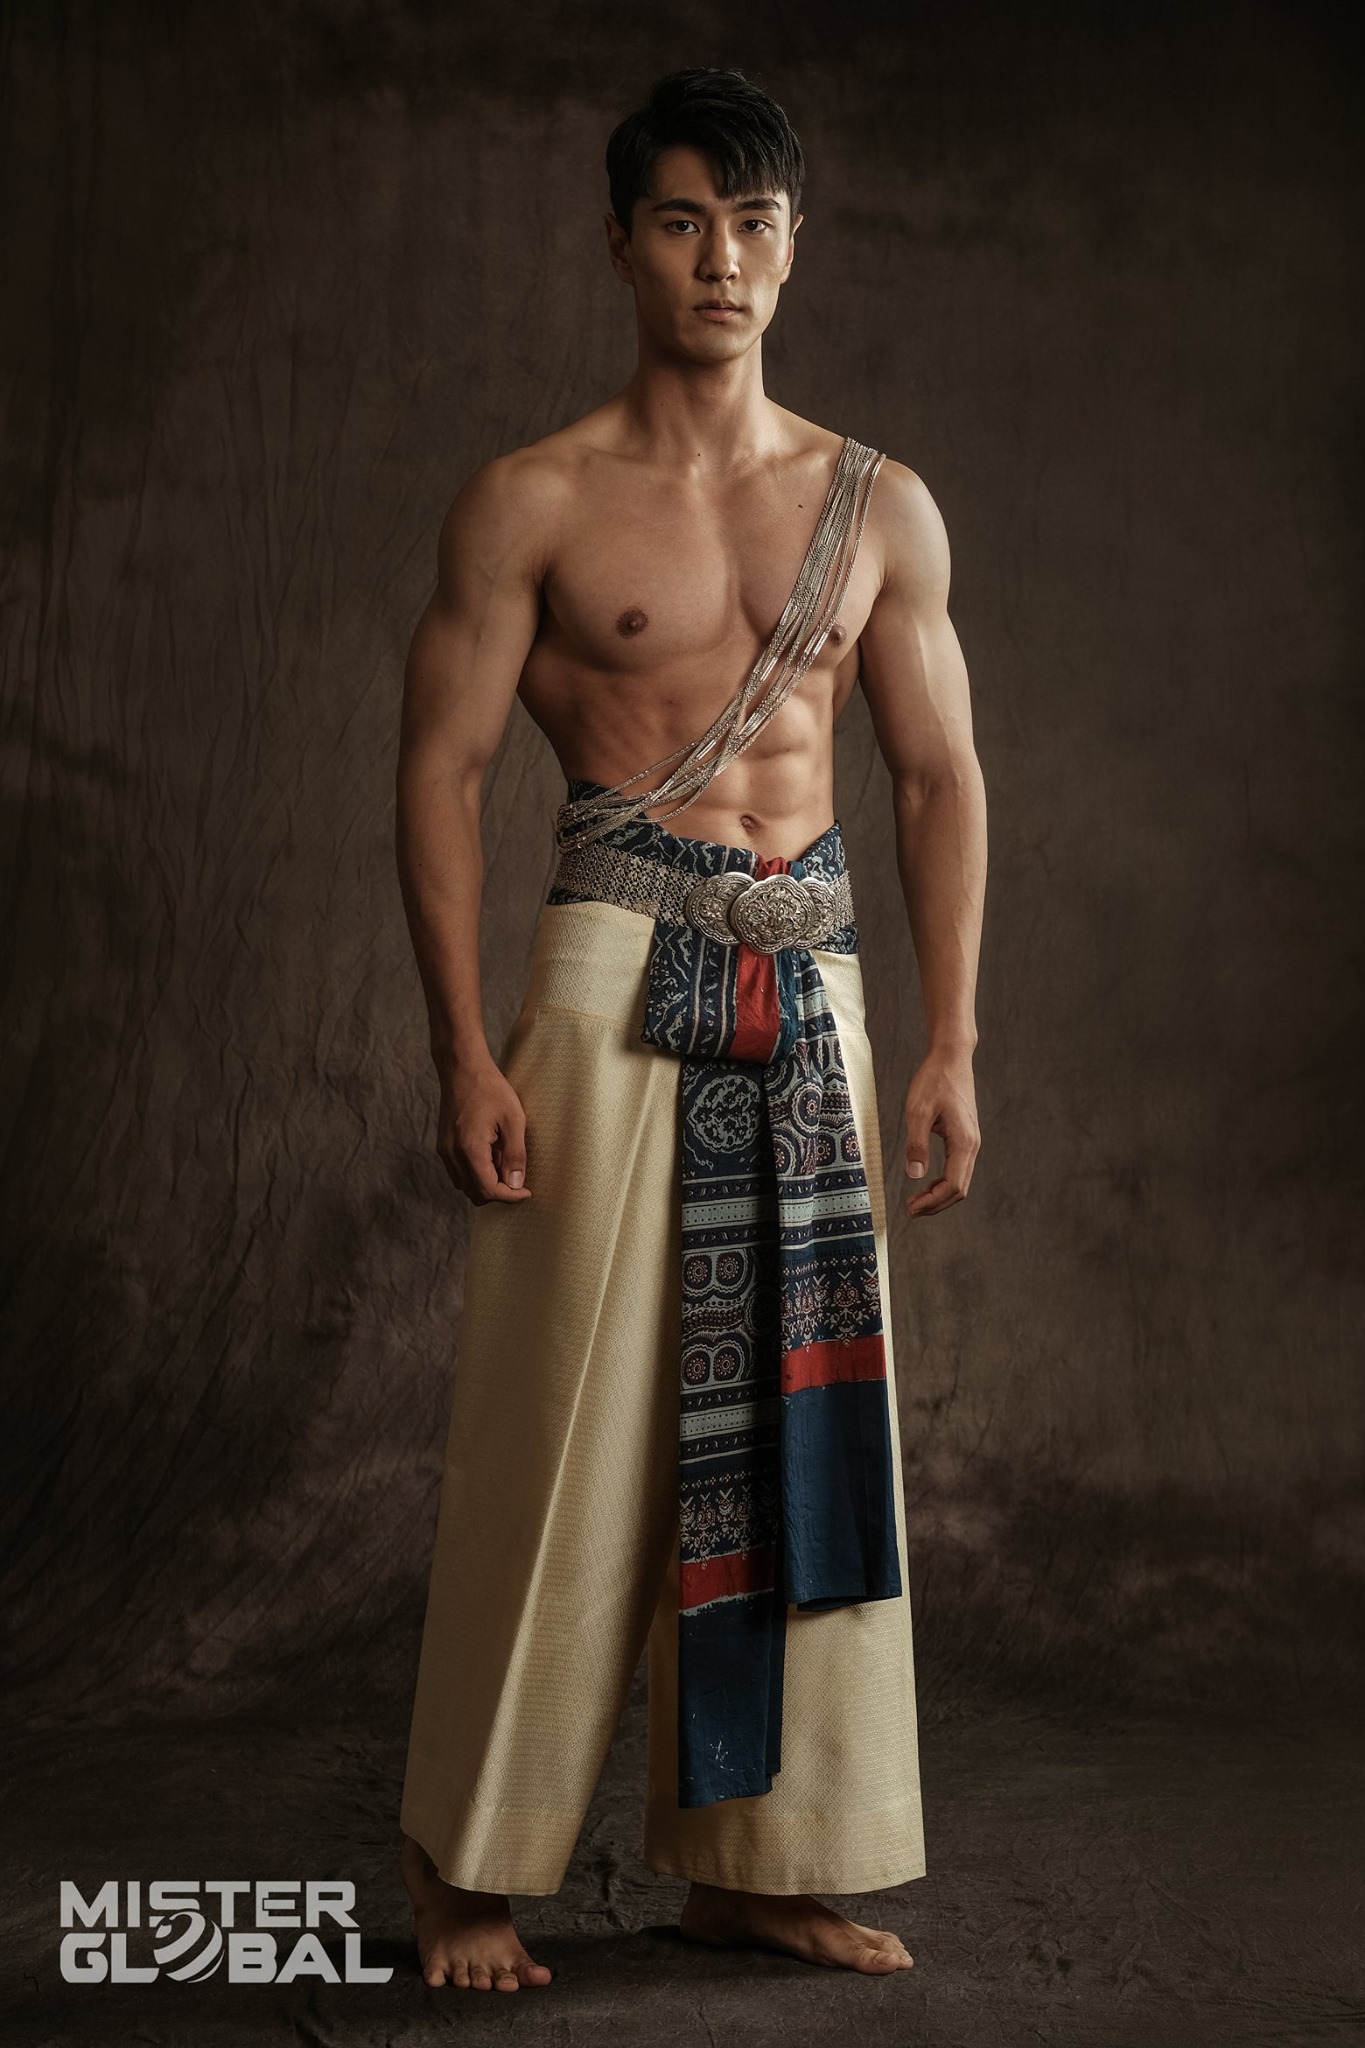 ☣️ Mister Global 2019 ⚛️ IN THAI COSTUMES ☣️ 11739